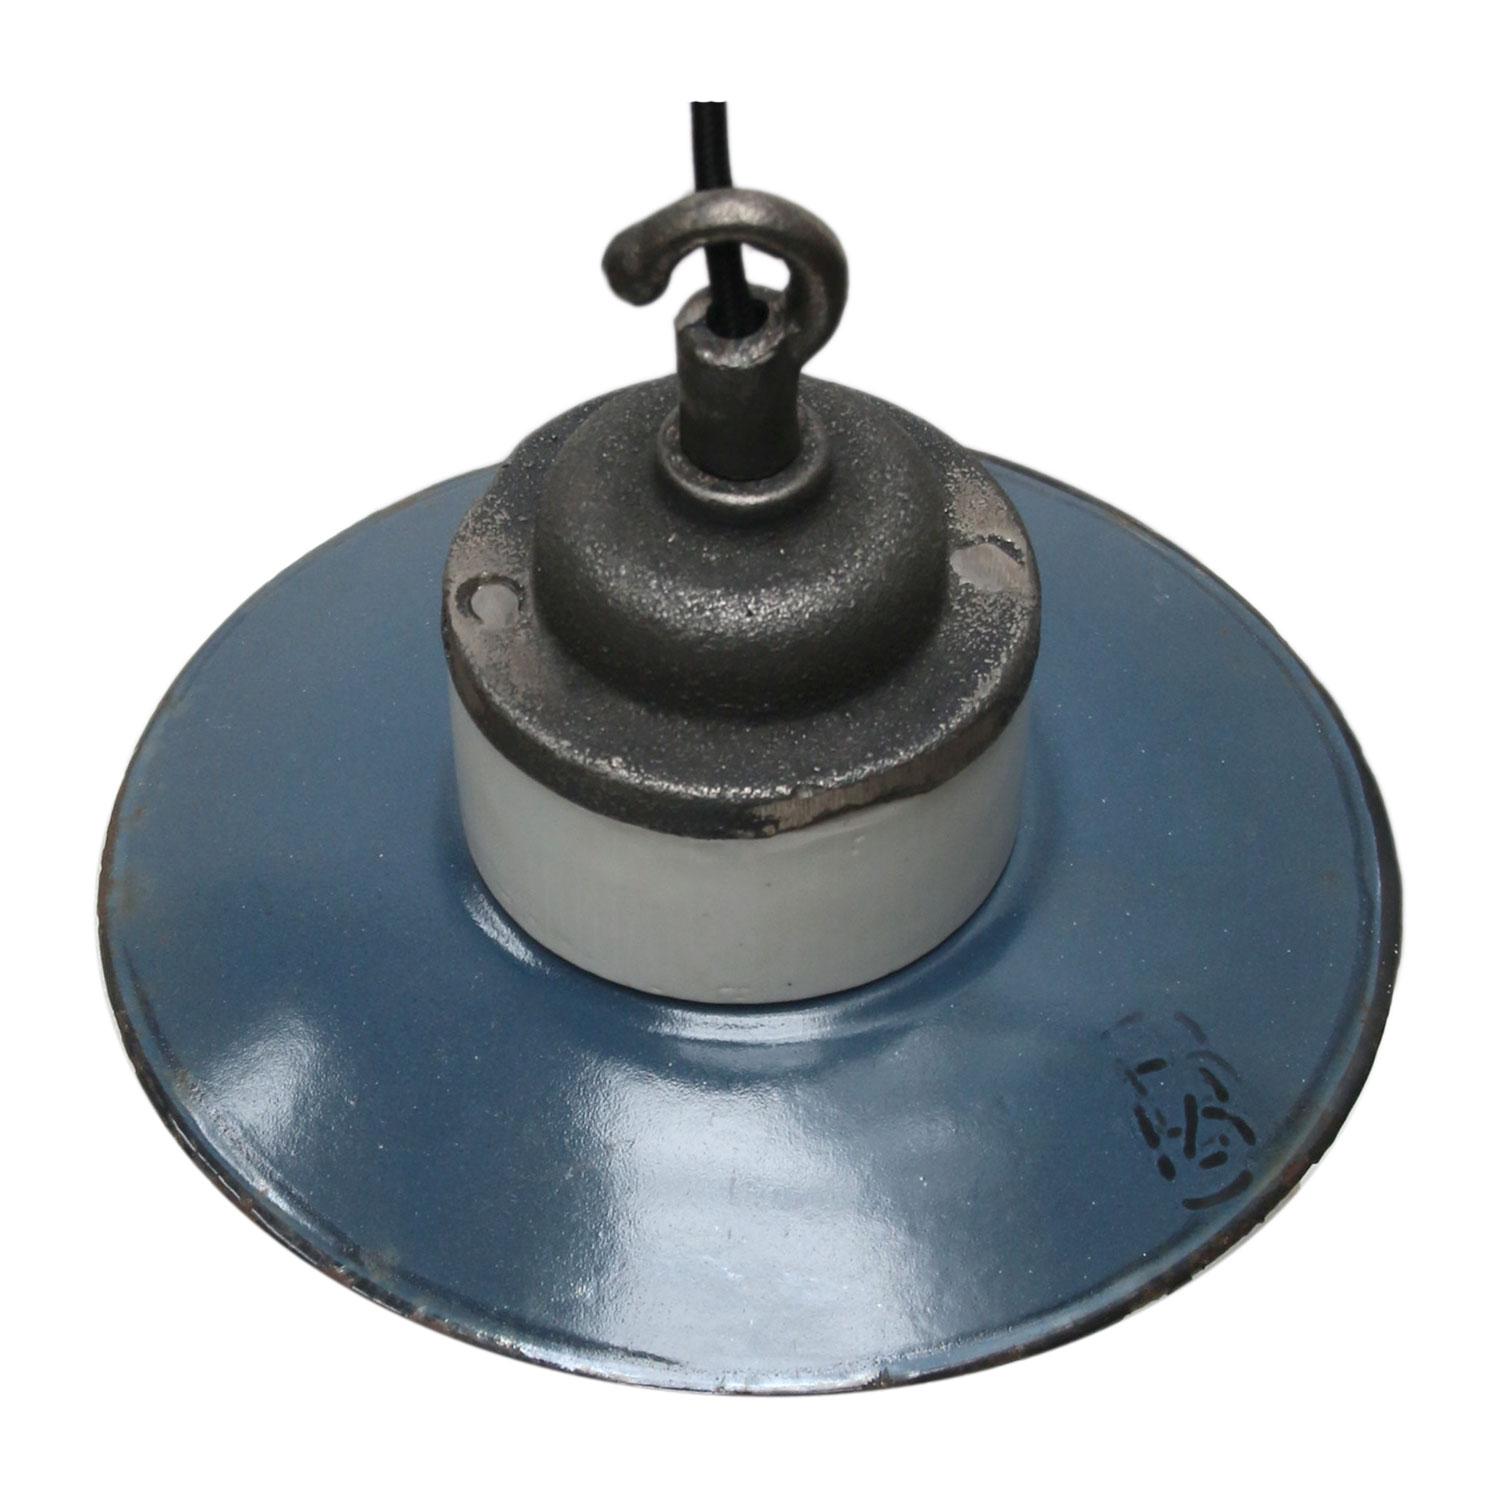 Porcelain Industrial hanging lamp.
White porcelain, cast iron and clear glass.
blue enamel shade
2 conductors, no ground.

Weight: 2.00 kg / 4.4 lb

Priced per individual item. All lamps have been made suitable by international standards for